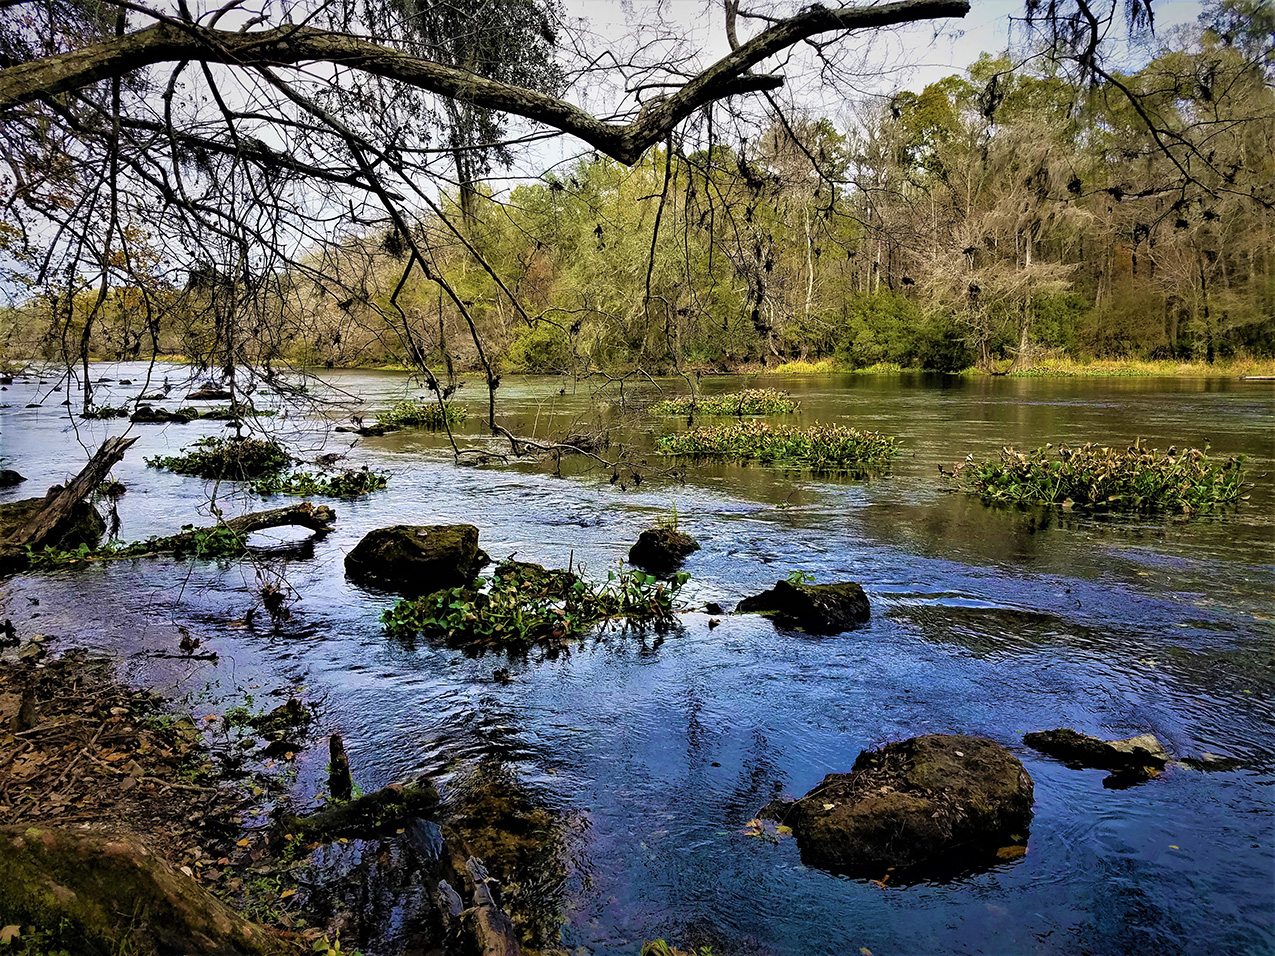 photo of the Santa Fe river featuring groups of lily pads and cypress knees